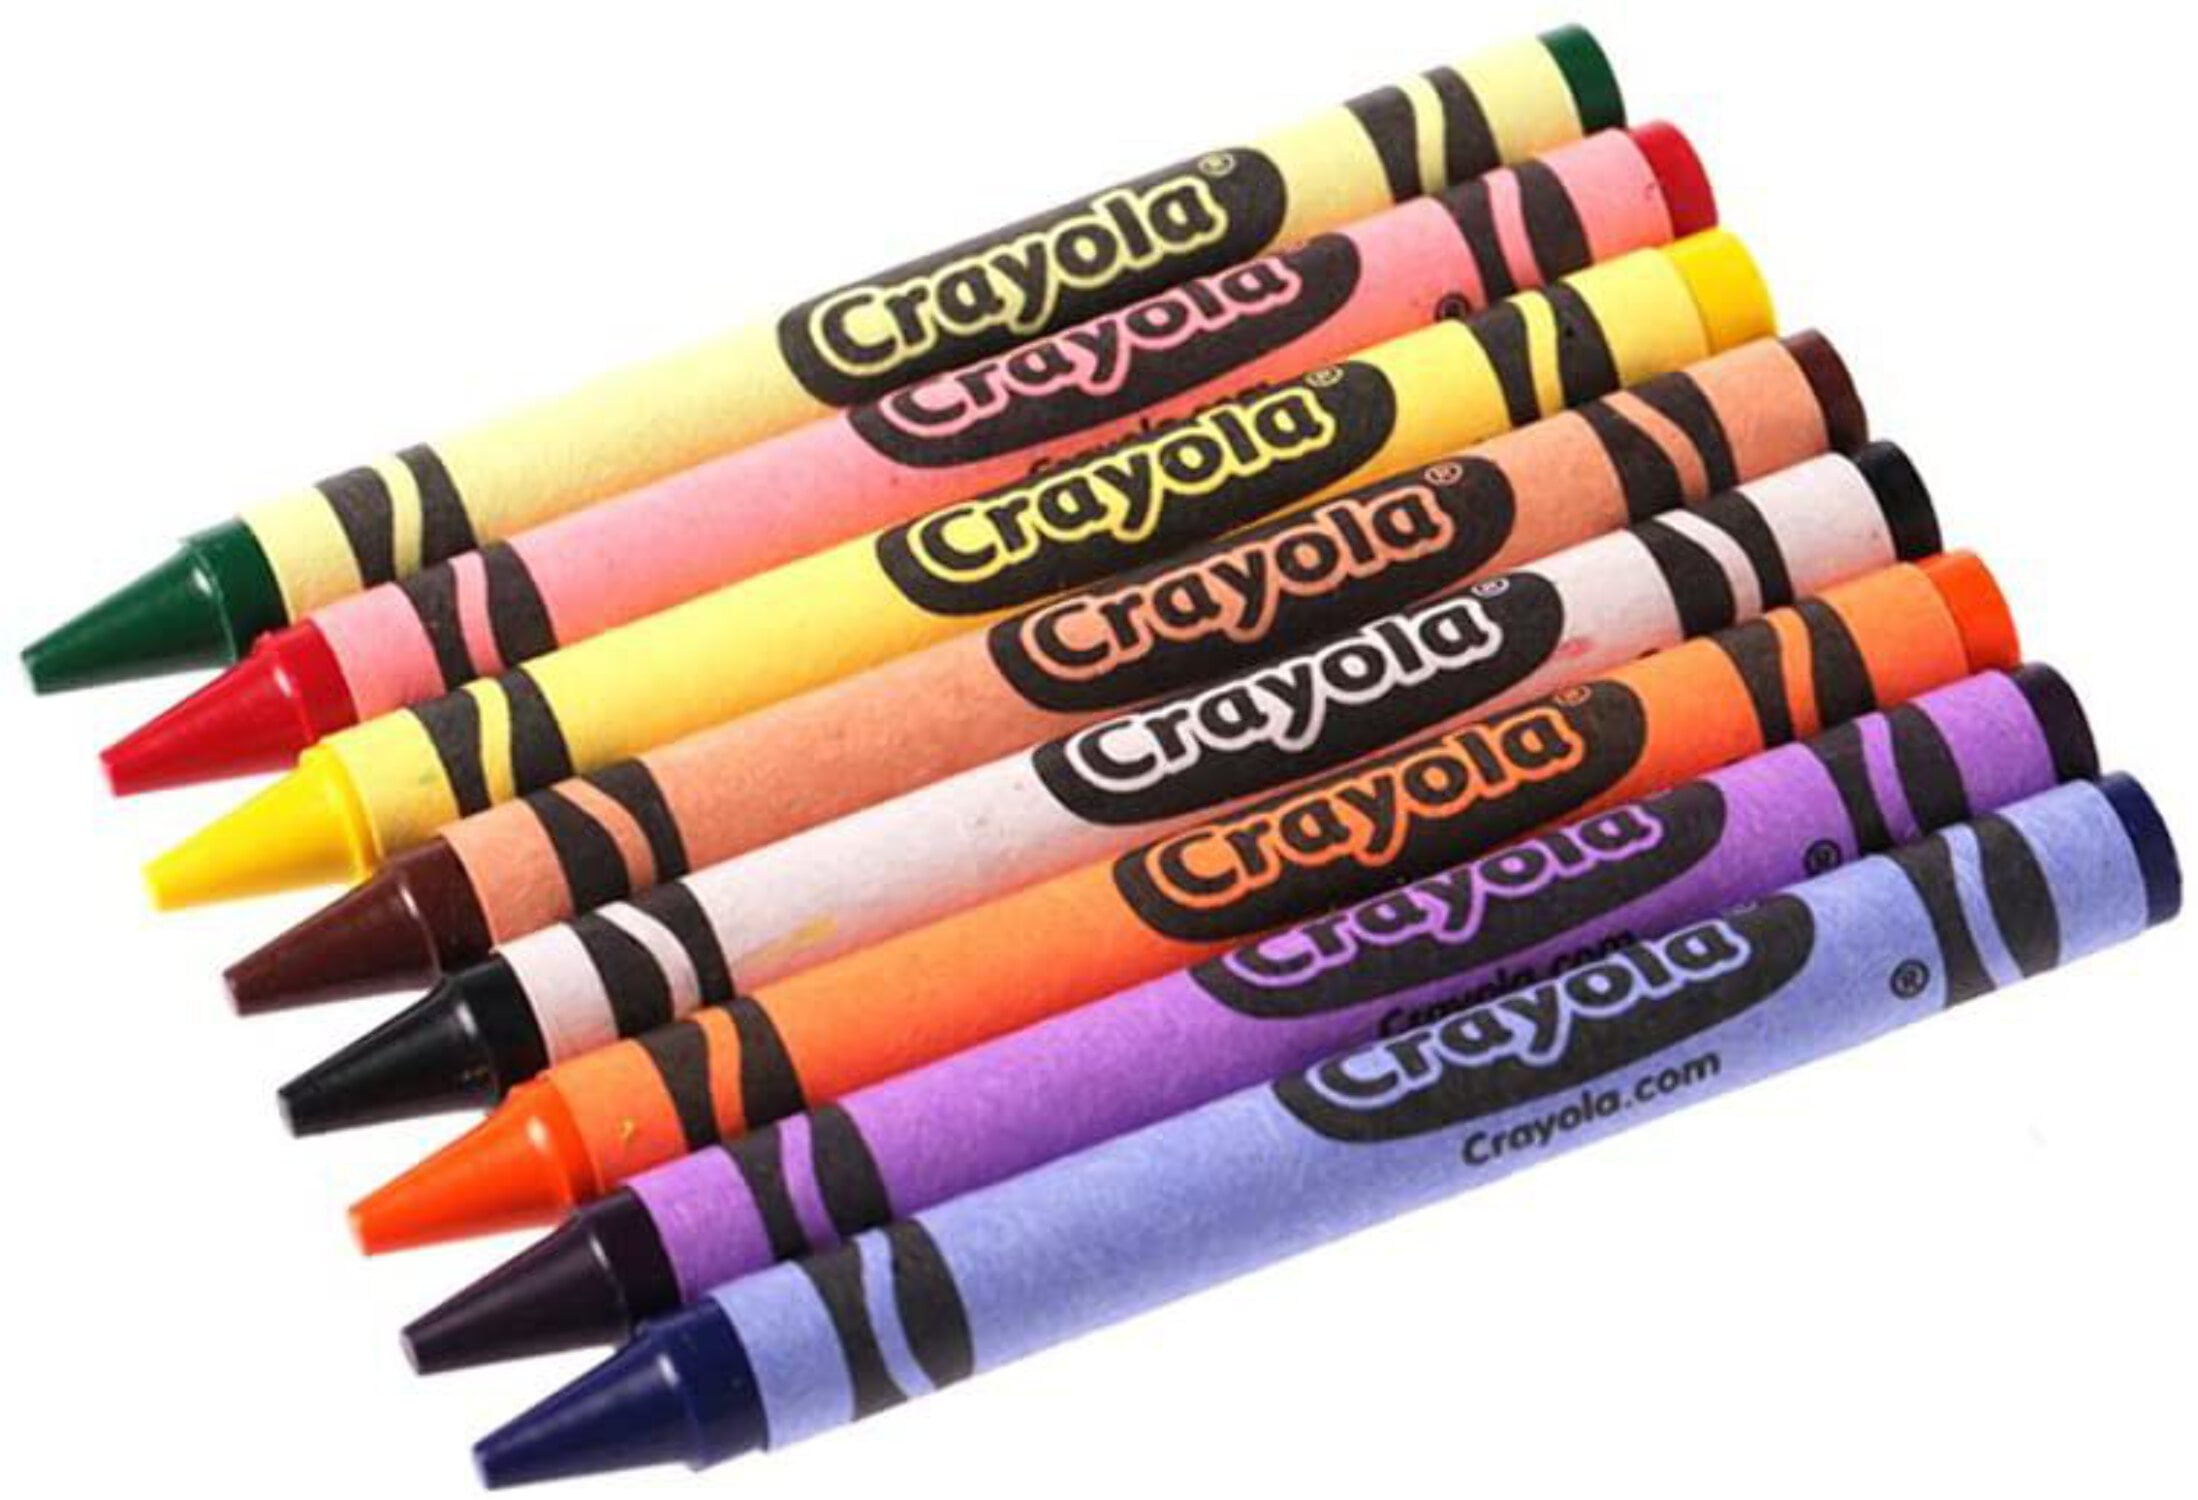 Baker Ross AF818 Mini Christmas Crayons - Pack of 8 Sets, ⁠Creative Art Supplies for Kids' Crafts, Projects and Ornaments, Perfect Party, Loot or